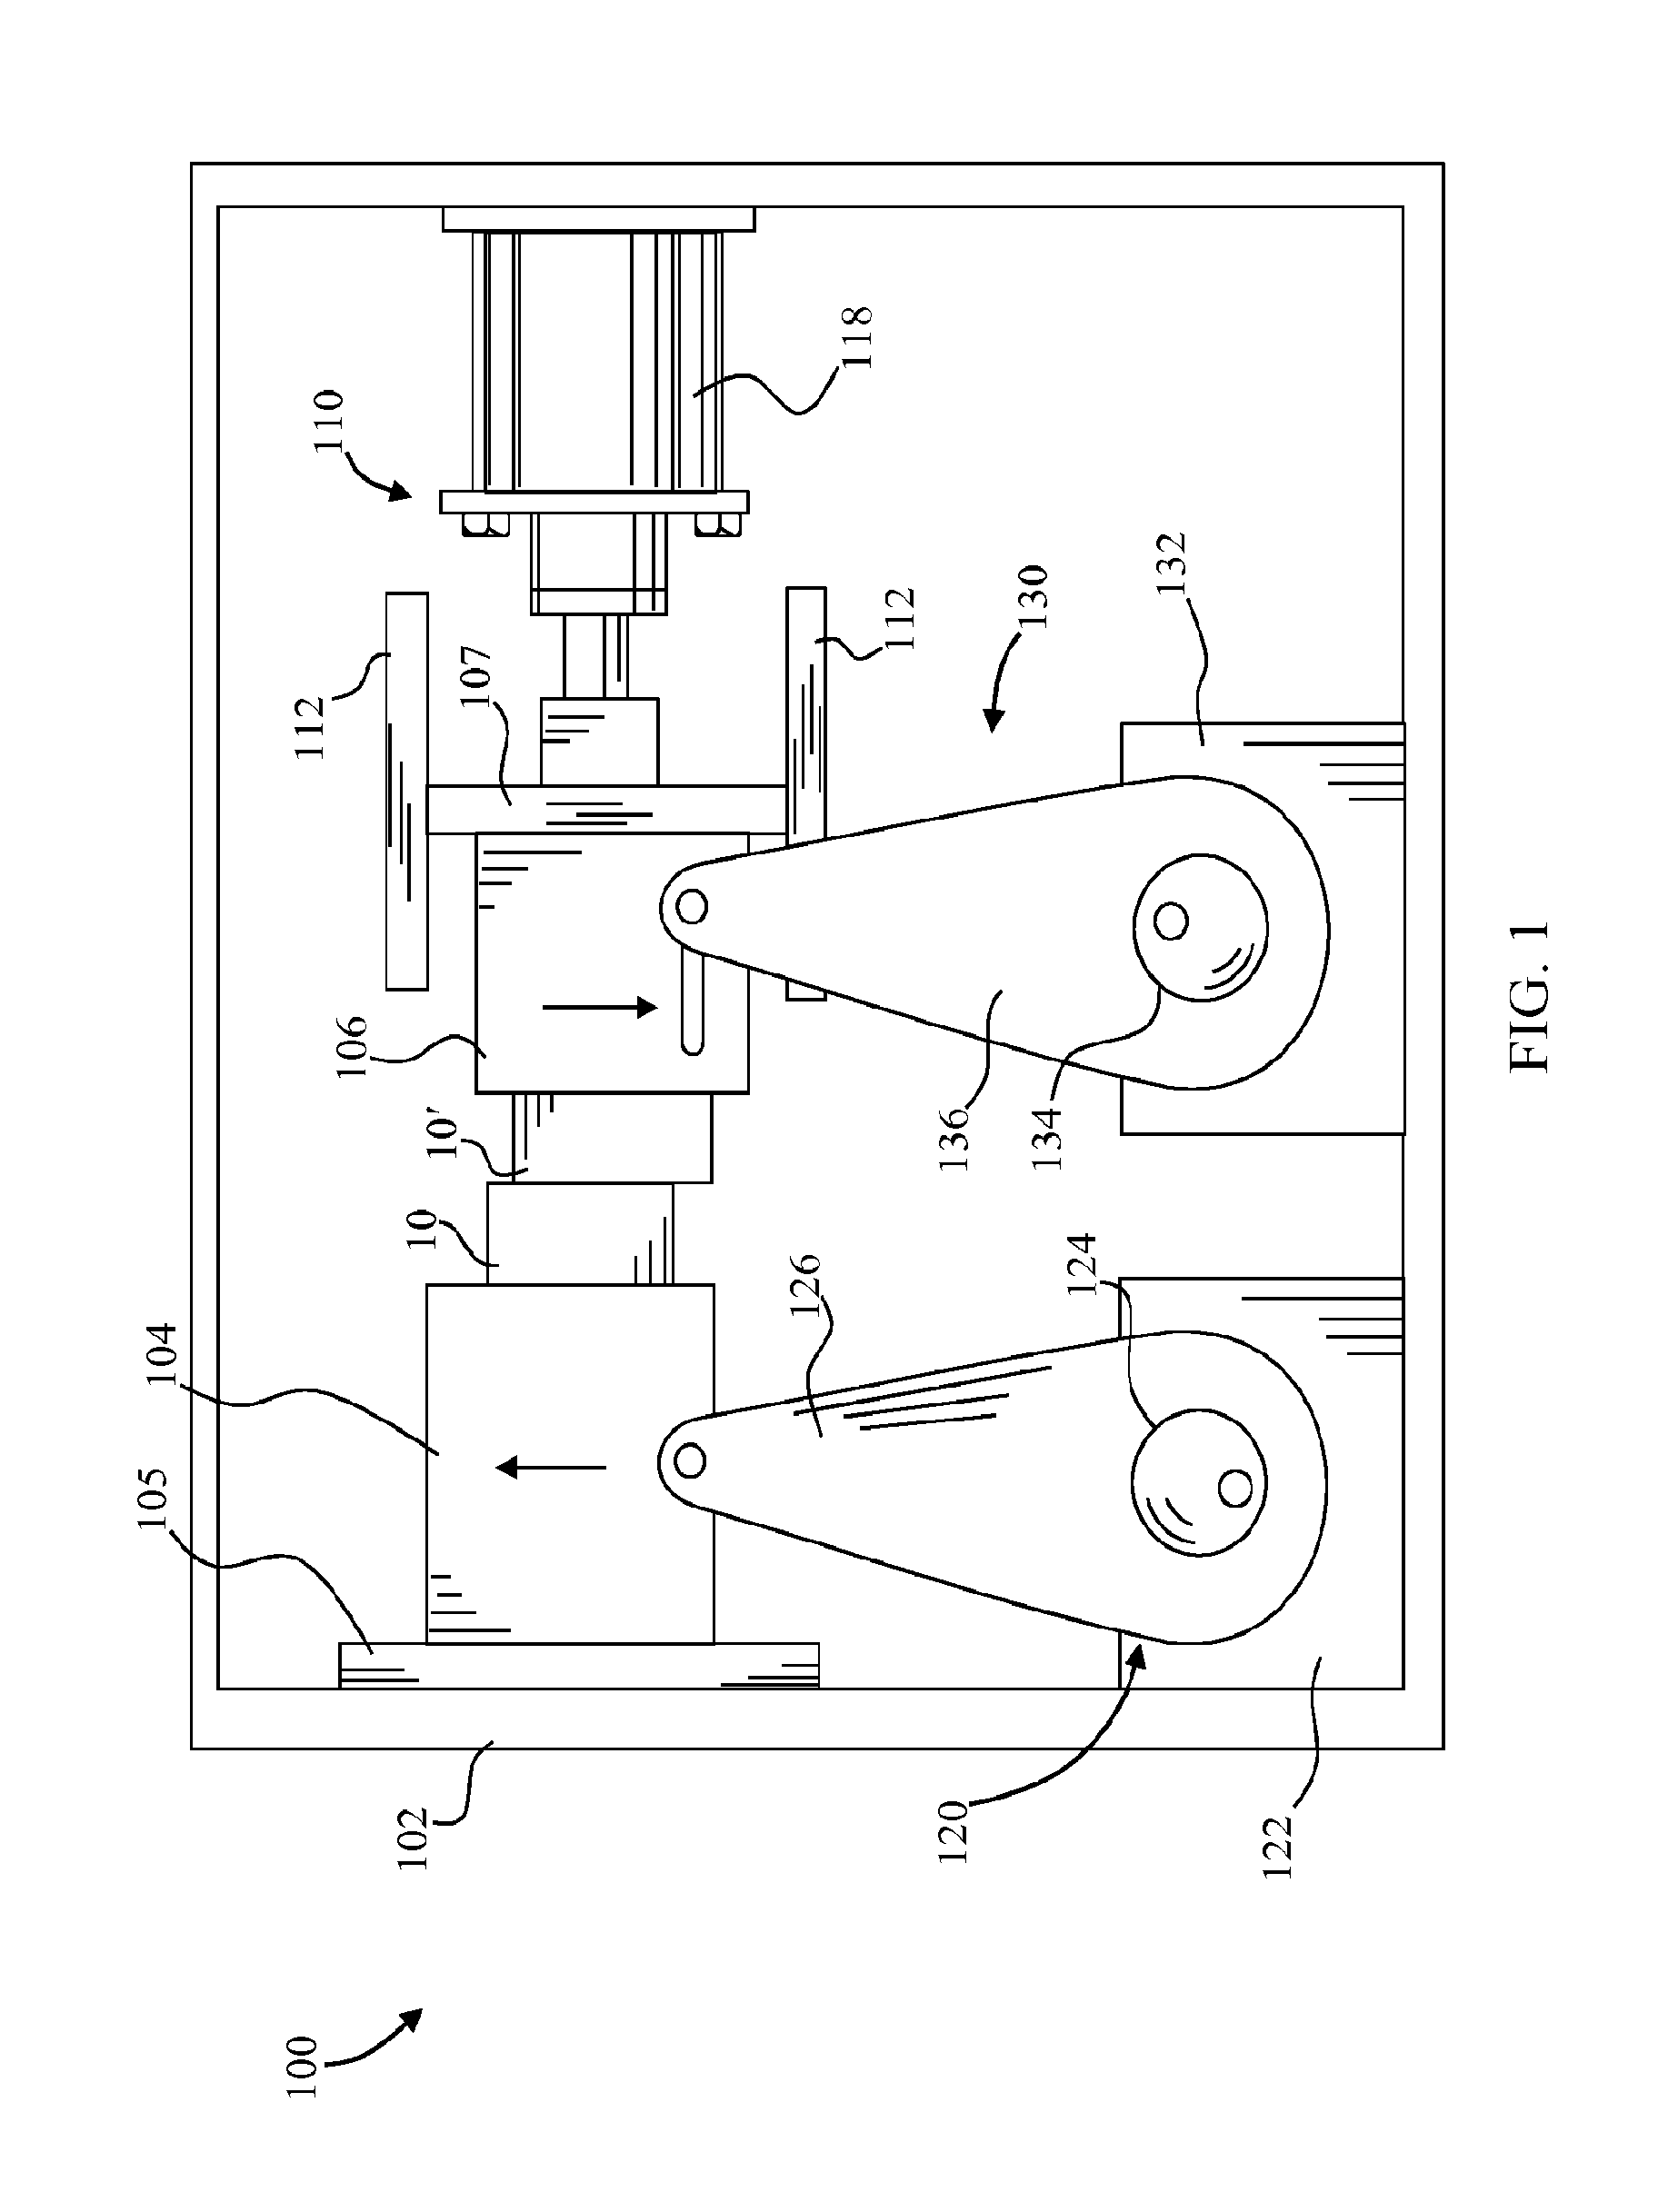 Apparatus for linear friction welding